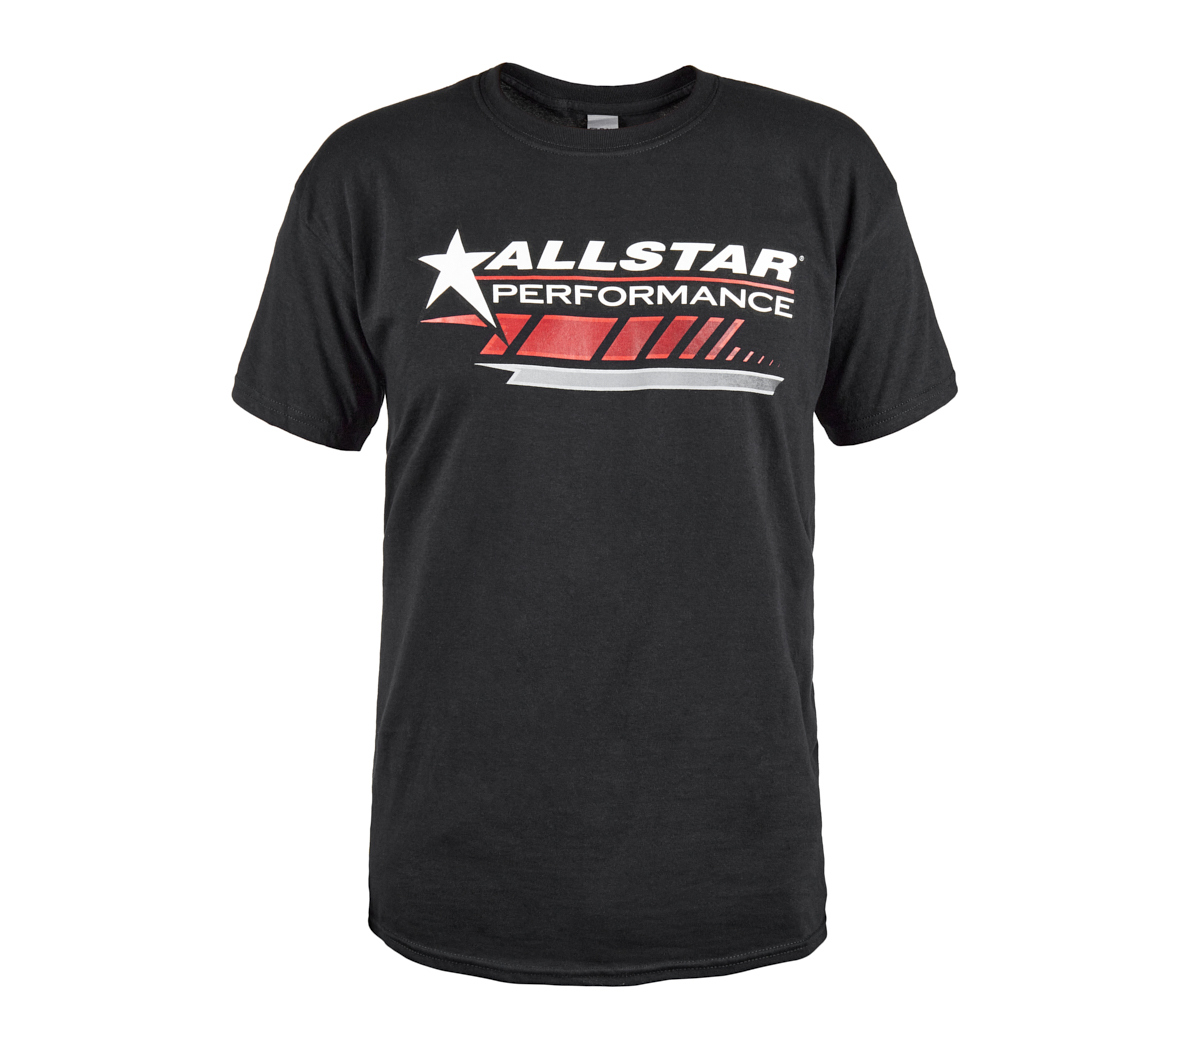 Allstar T-Shirt Black w/ Red Graphic X-Large